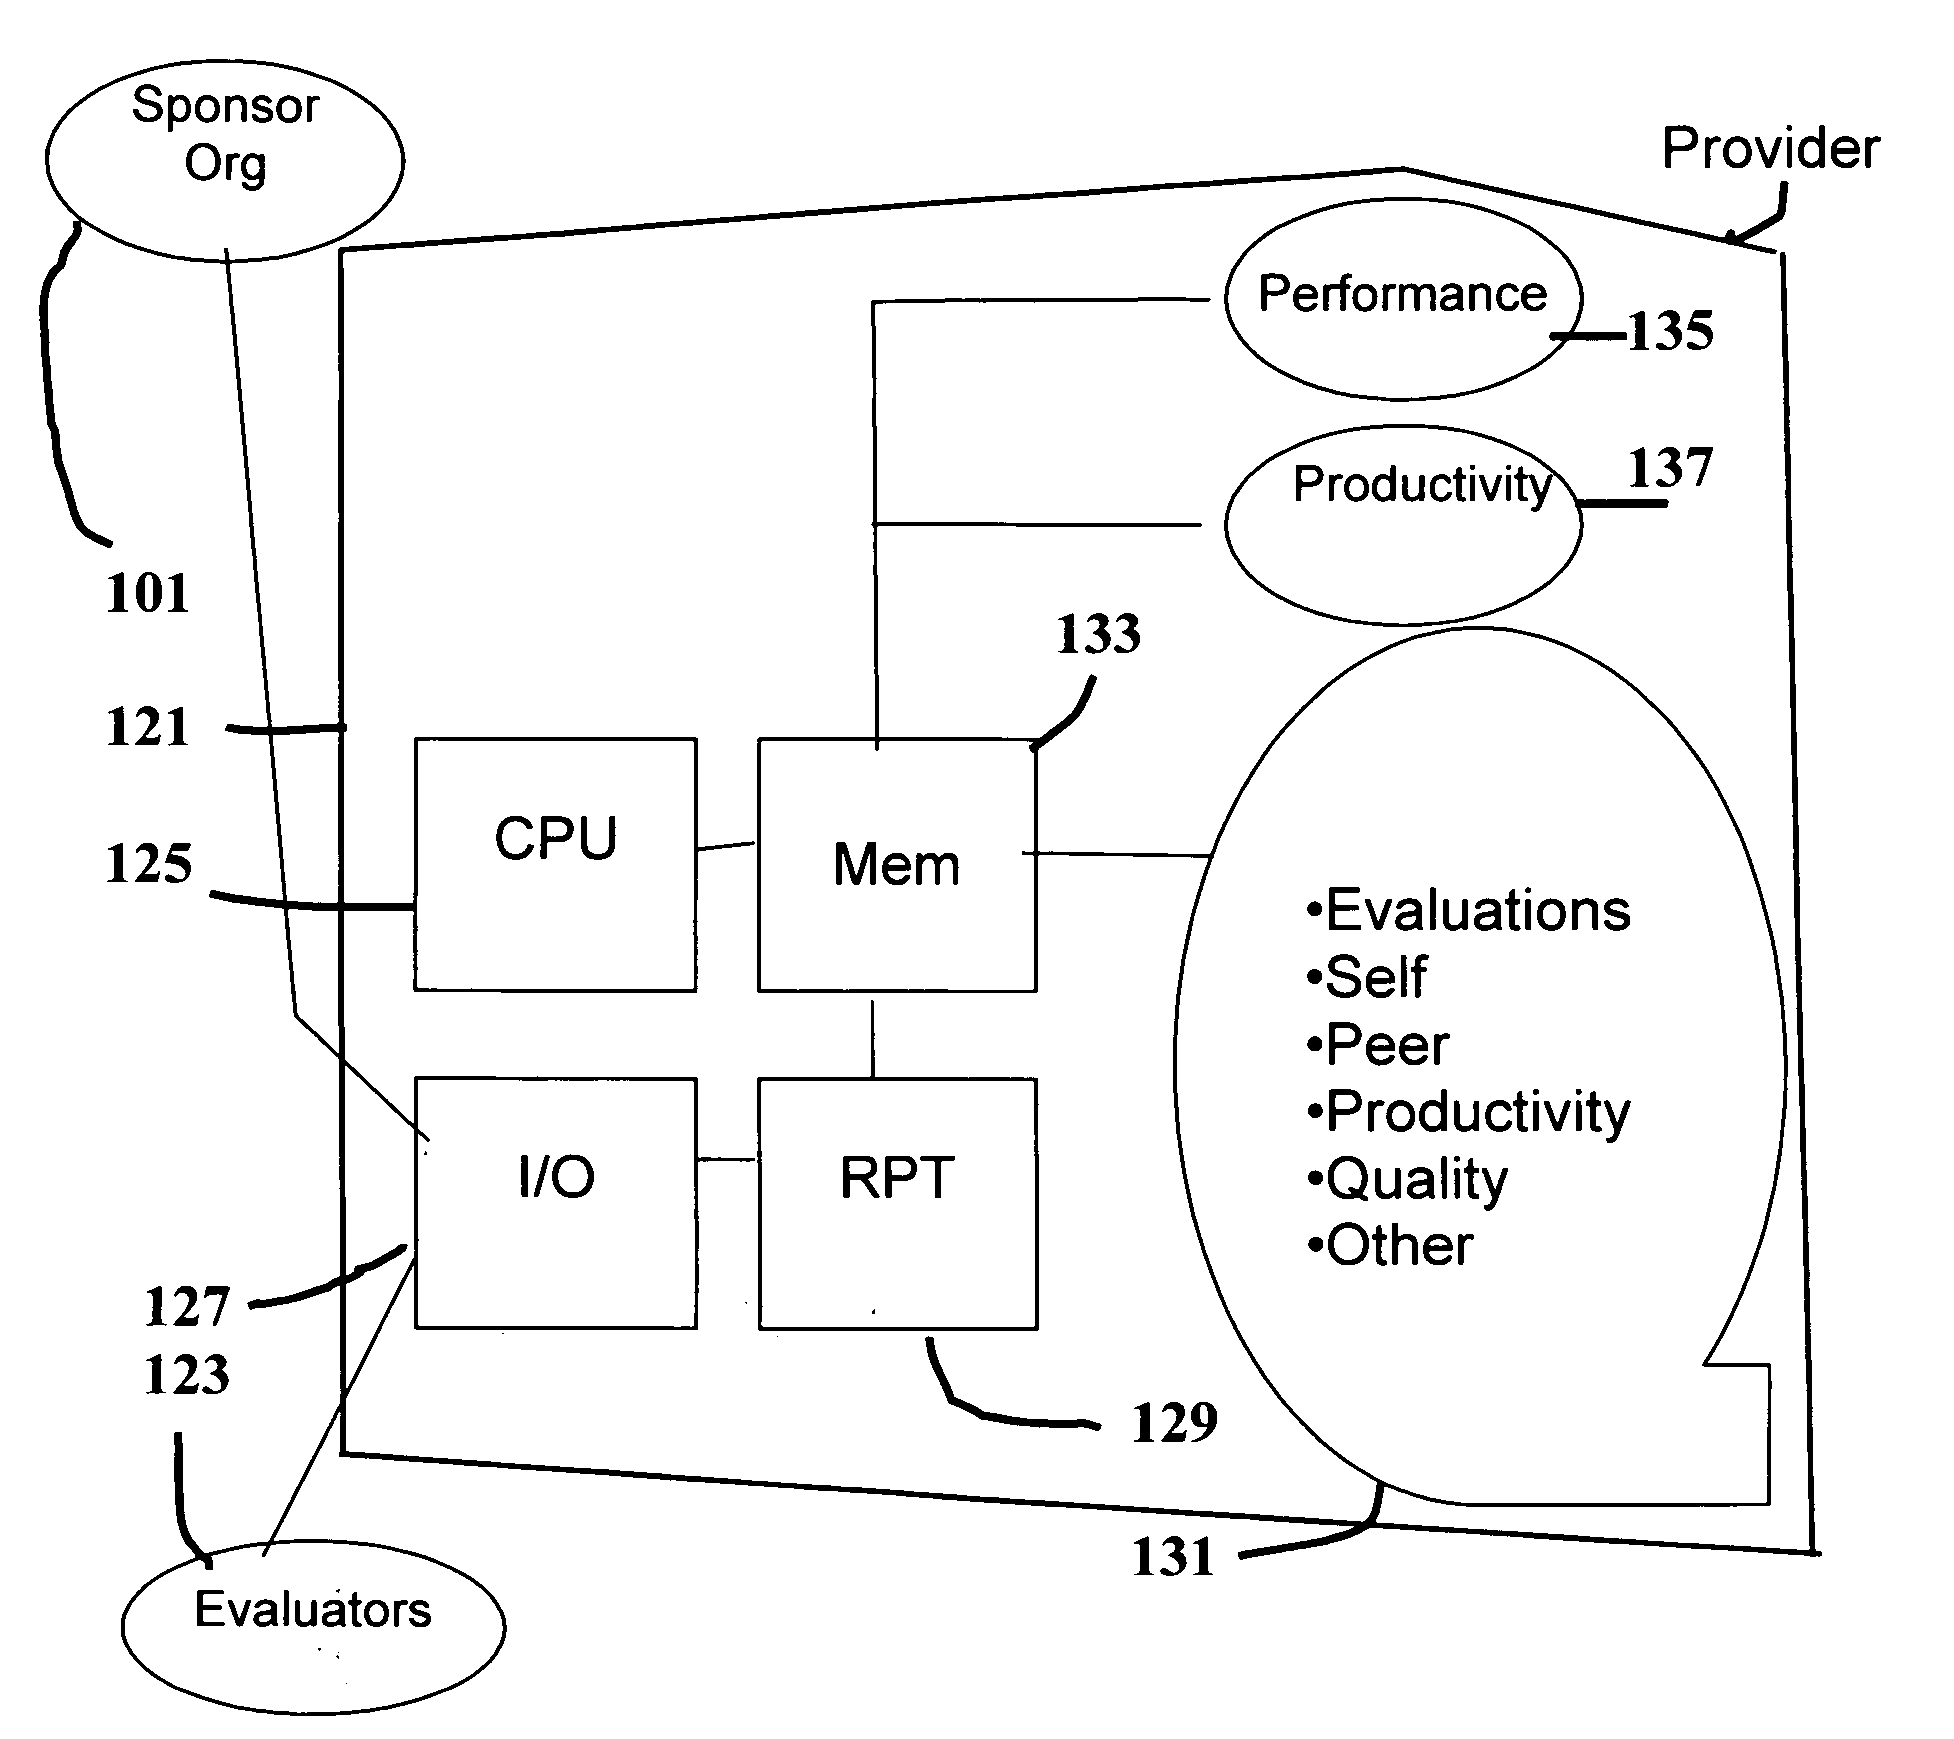 System, method and computer product for implementing a 360 degree critical evaluator